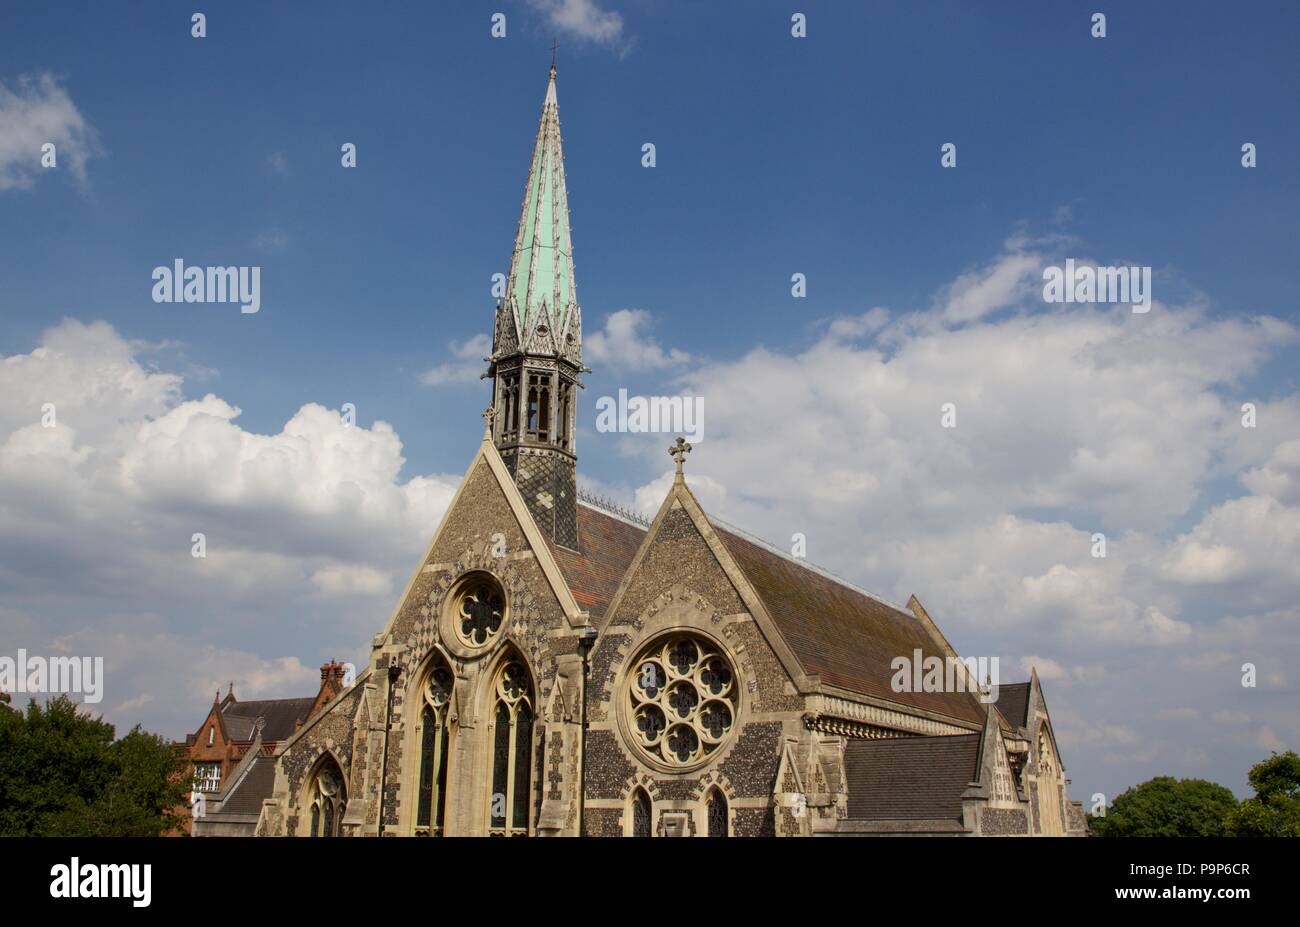 The Harrow School Chapel featuring a green Church Spire. It is a grade II listed building built 1854-57 on High Street, Harrow-On-The-Hill Stock Photo